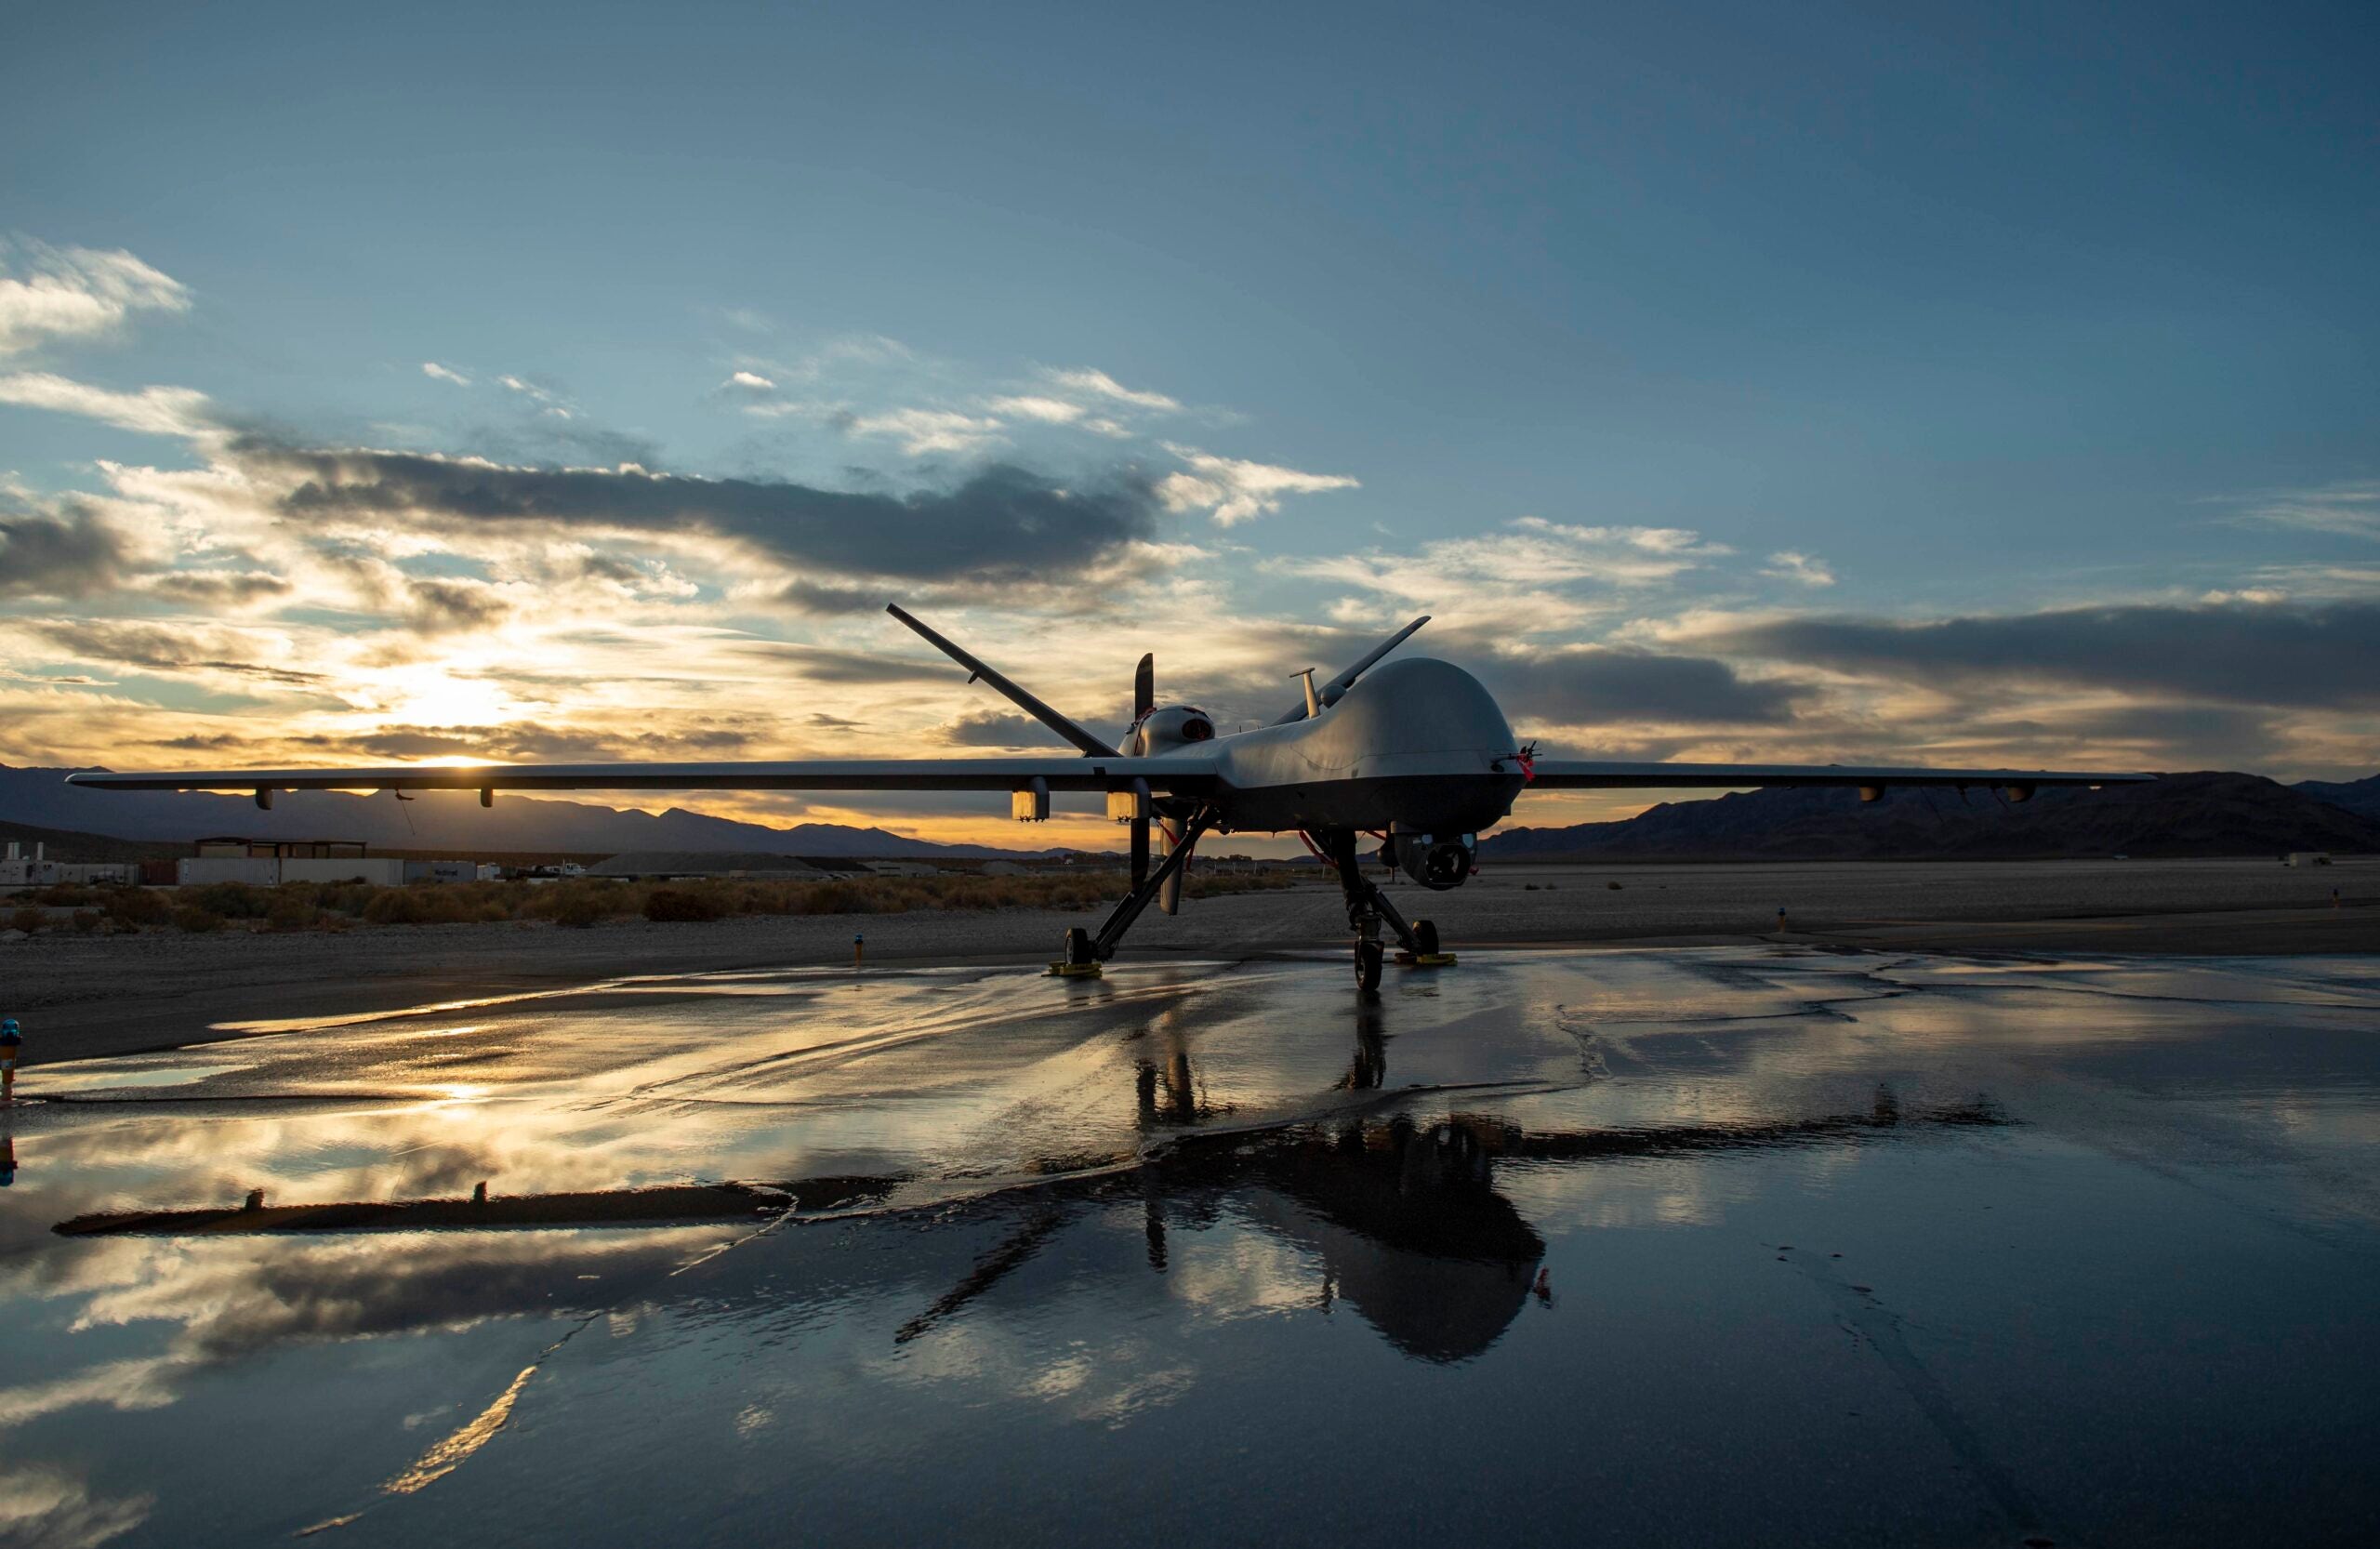 An MQ-9 Reaper sits on the runway during sunset at Creech Air Force Base, Nev., Nov. 17, 2020. Using satellite communication links, the MQ-9 can acquire and pass real-time imagery data to ground users around the clock and beyond line of sight. (U.S. Air Force photo by Staff Sgt. Lauren Silverthorne)